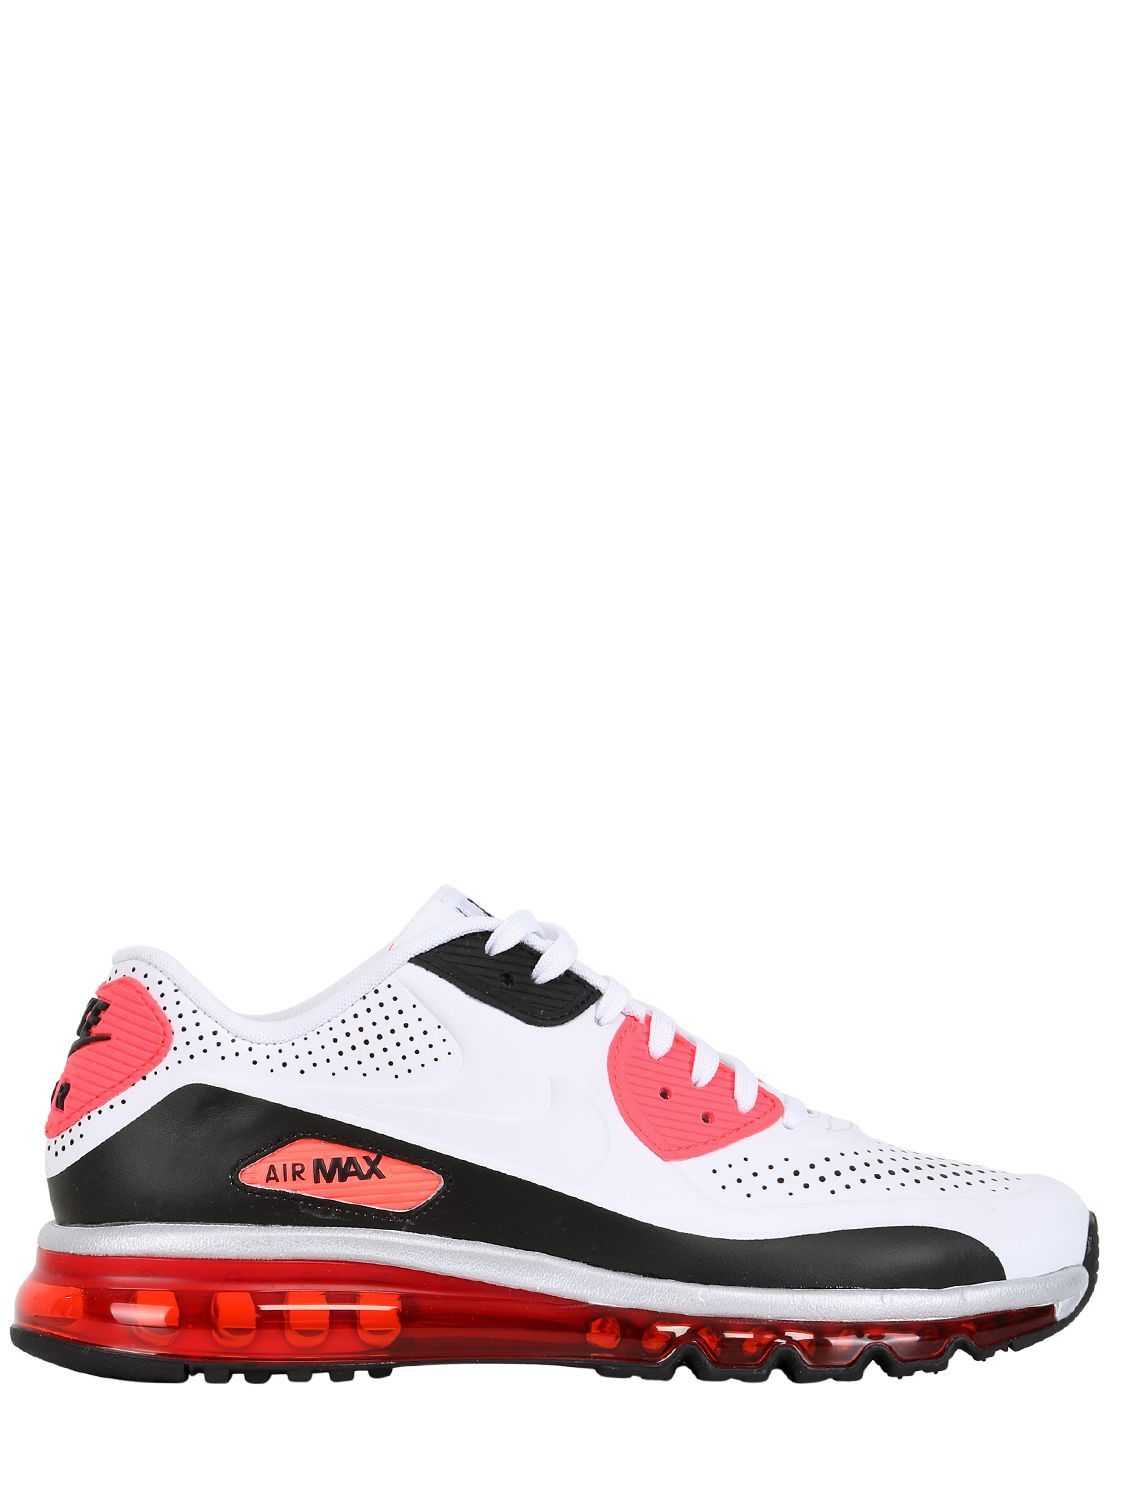 Nike Air Max 90 Infrared Sneakers for Men | Lyst